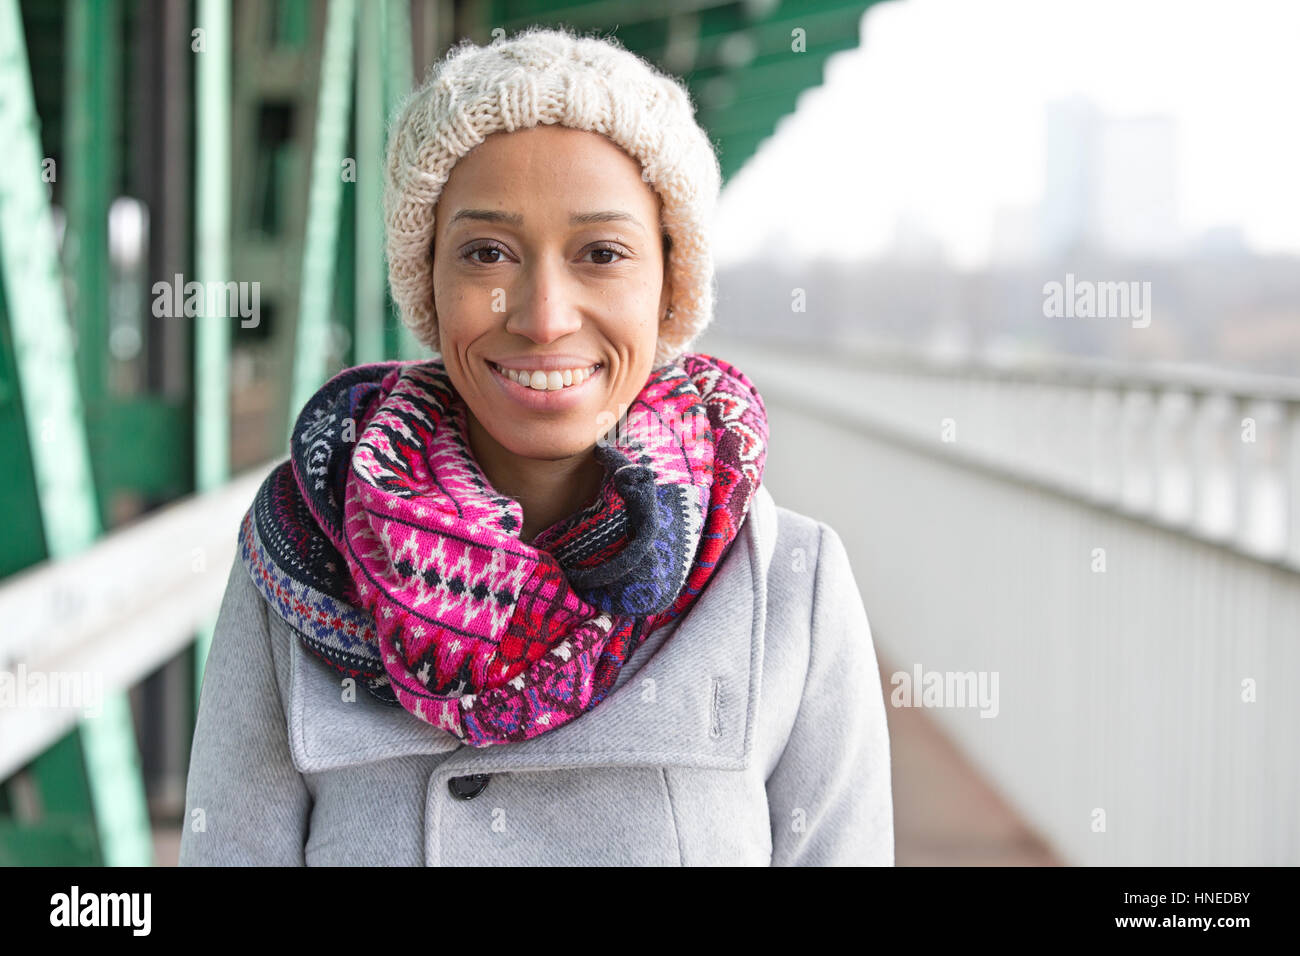 Portrait of happy woman in warm clothing standing outdoors Stock Photo